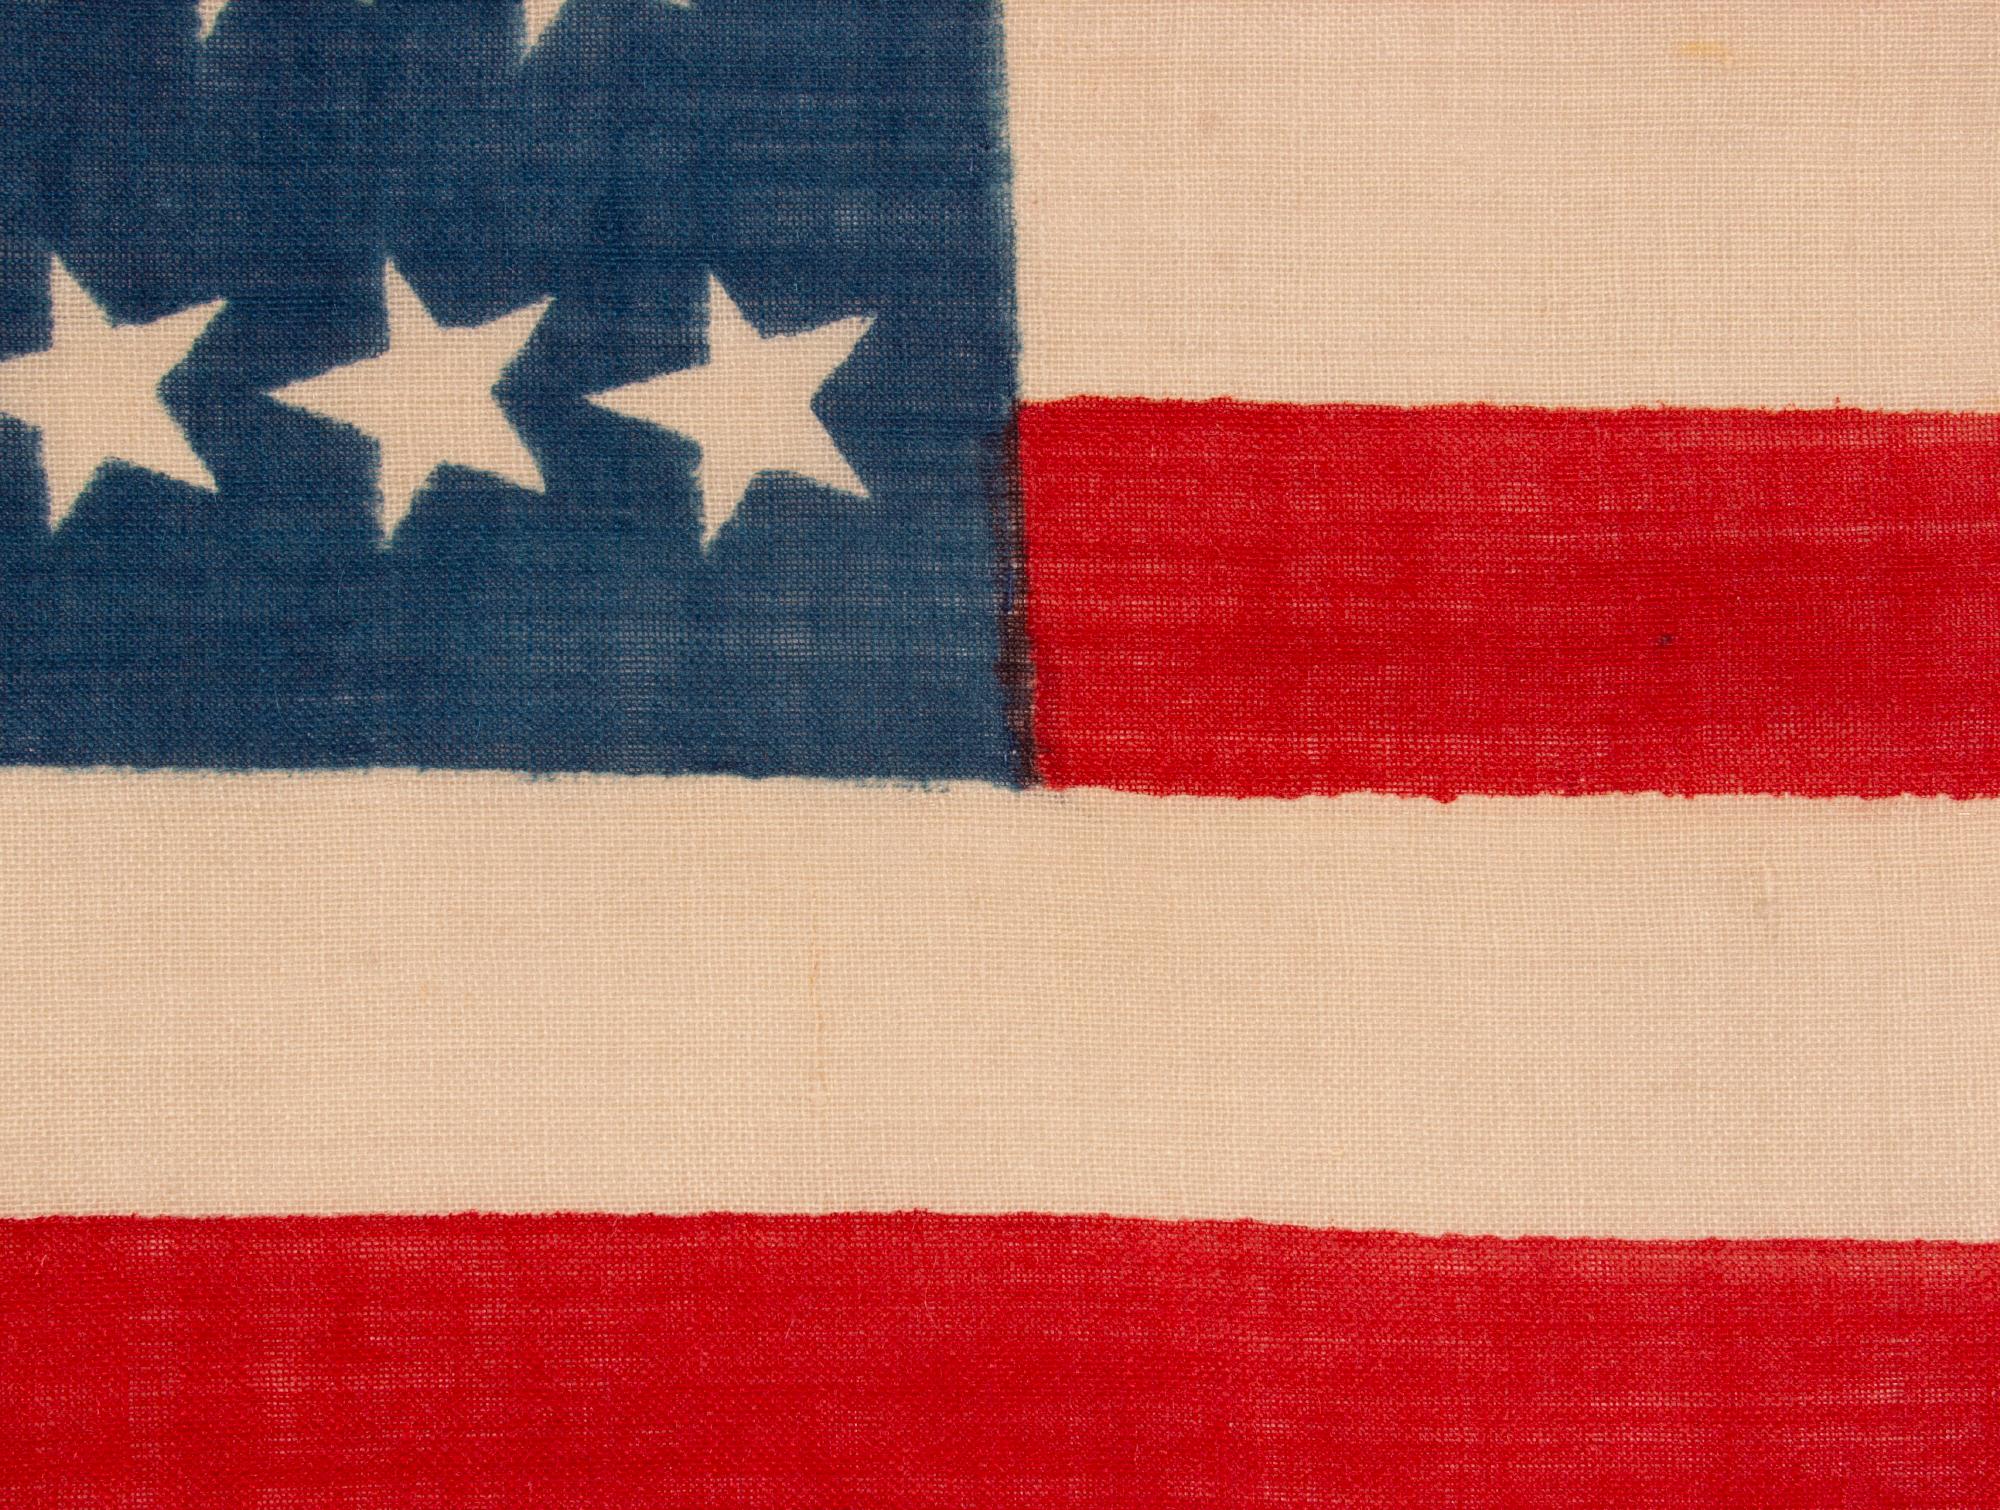 38 Star Antique American Flag by Horstman Brothers, Colorado Statehood, ca 1876 In Good Condition For Sale In York County, PA